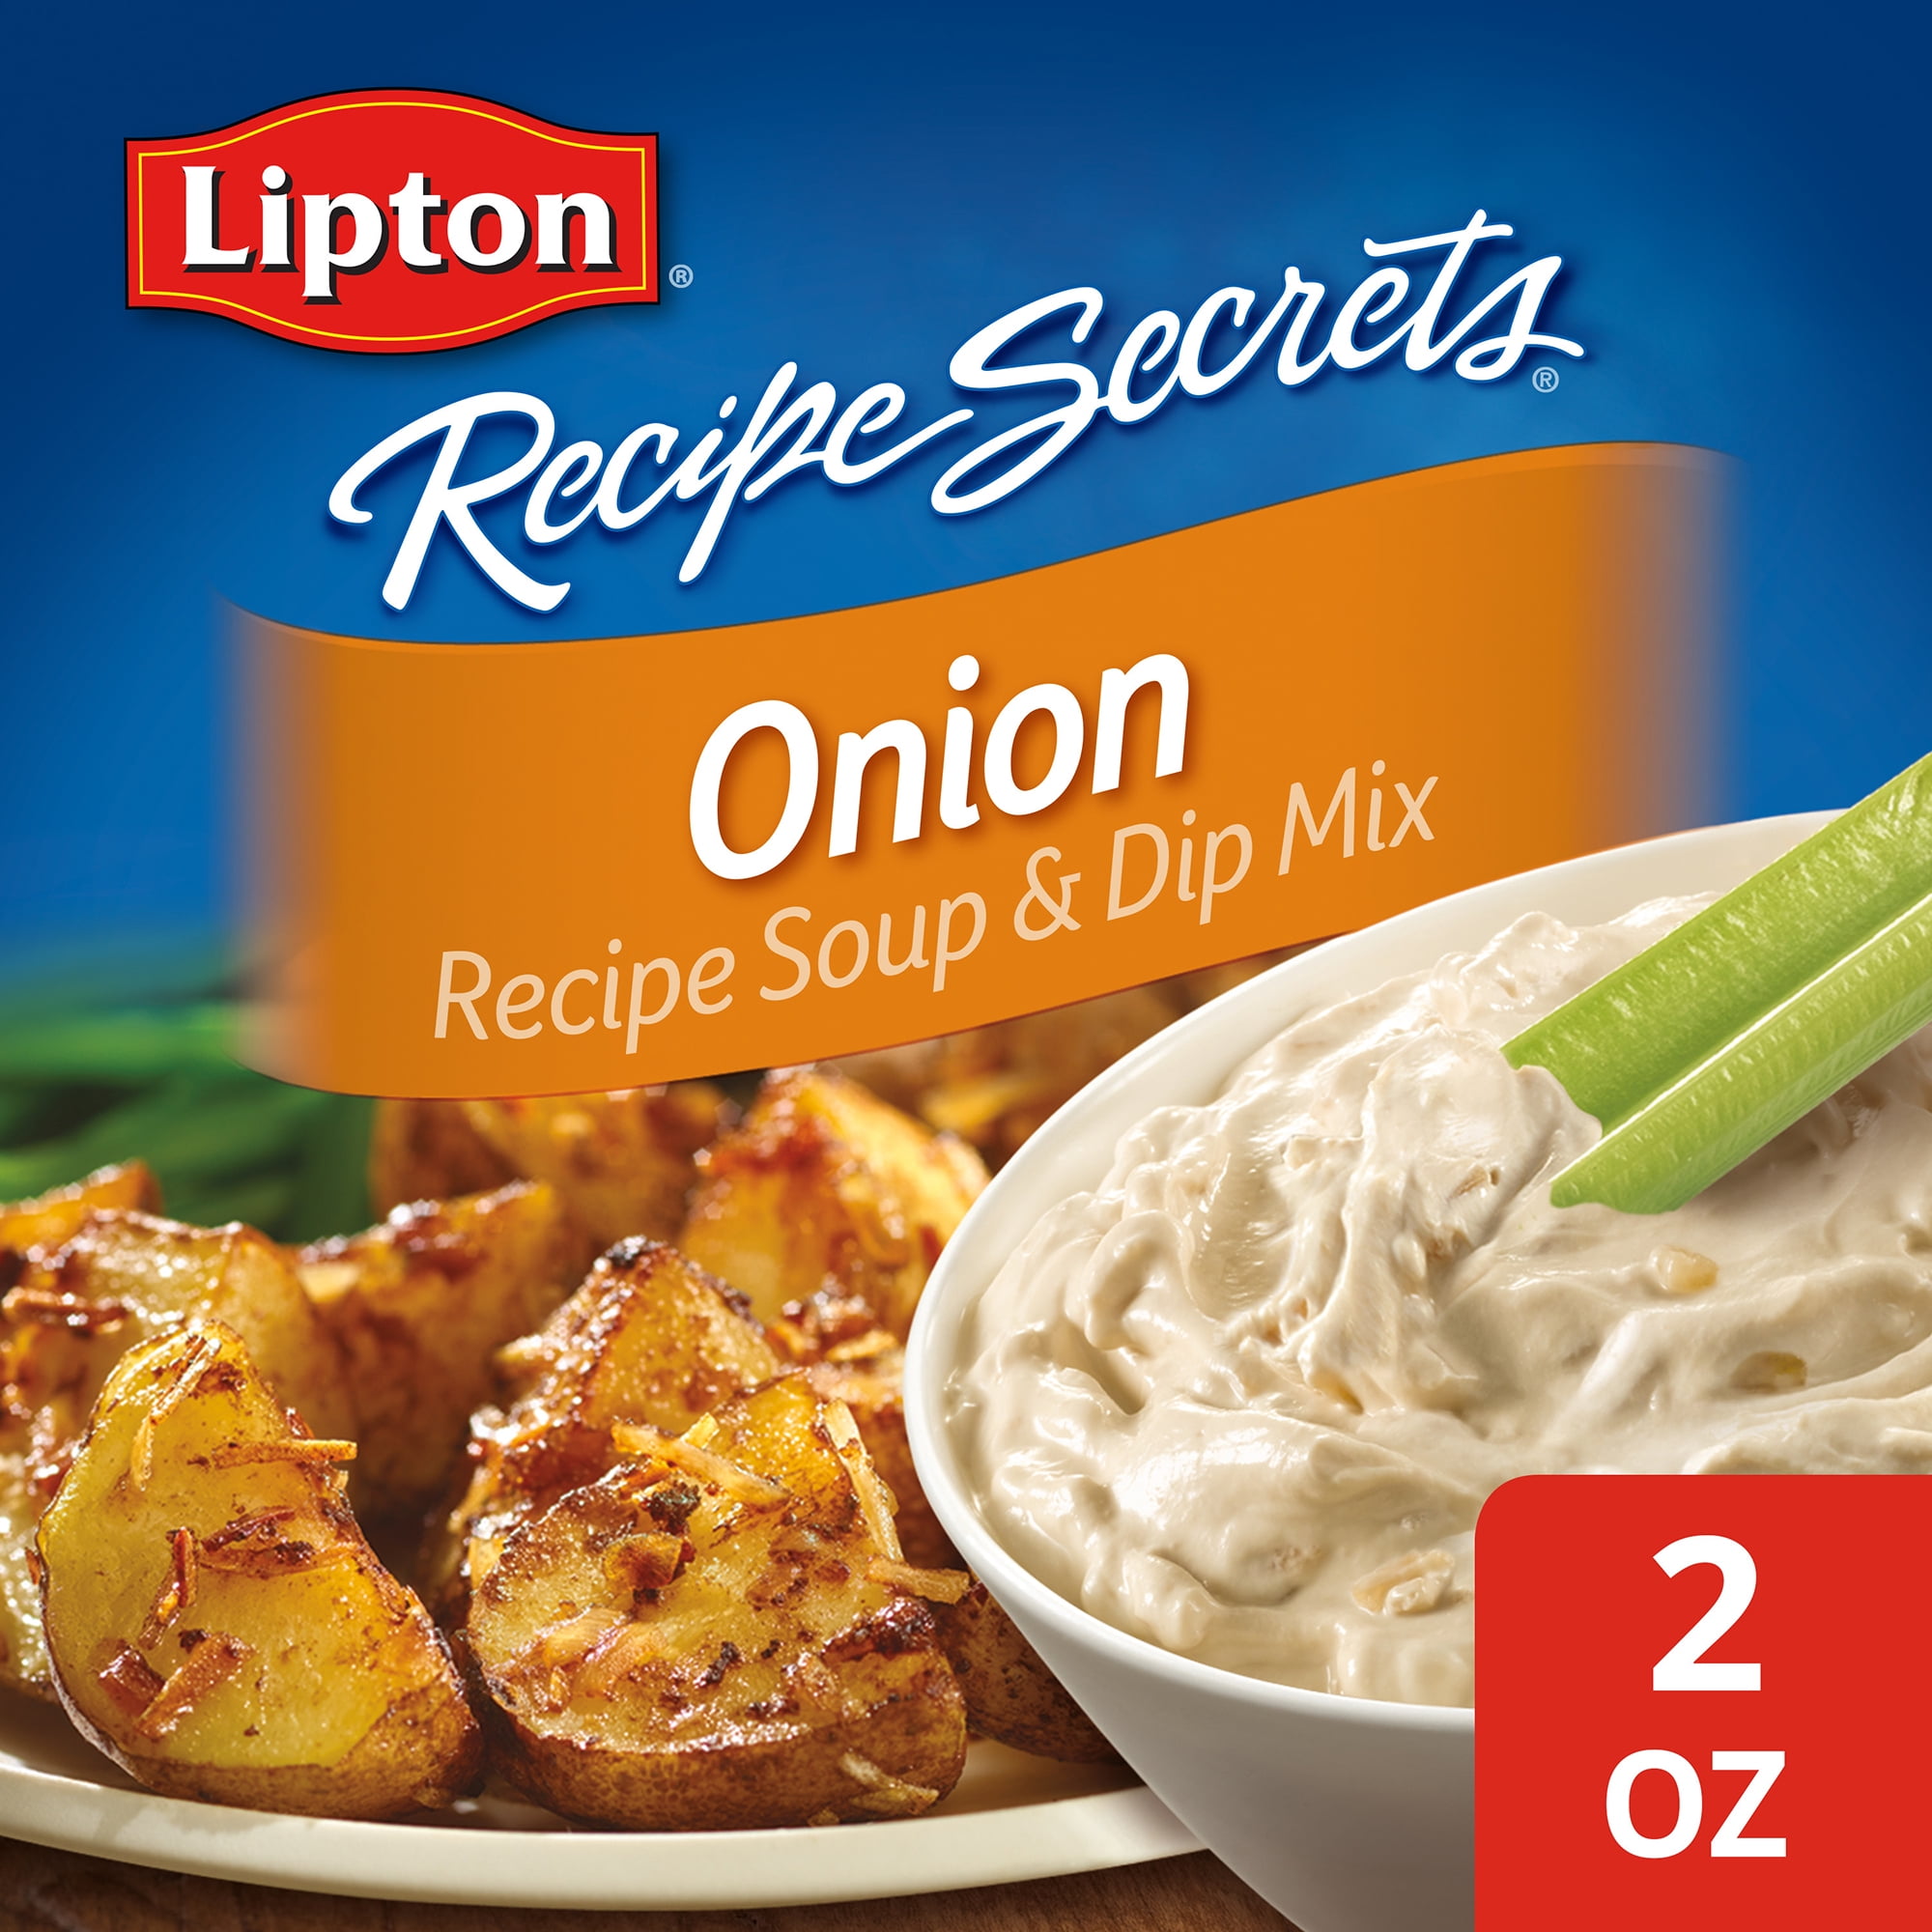 Lipton Recipe Secrets Onion Dry Soup and Dip Mix, 2 oz, 2 Pack - image 1 of 11